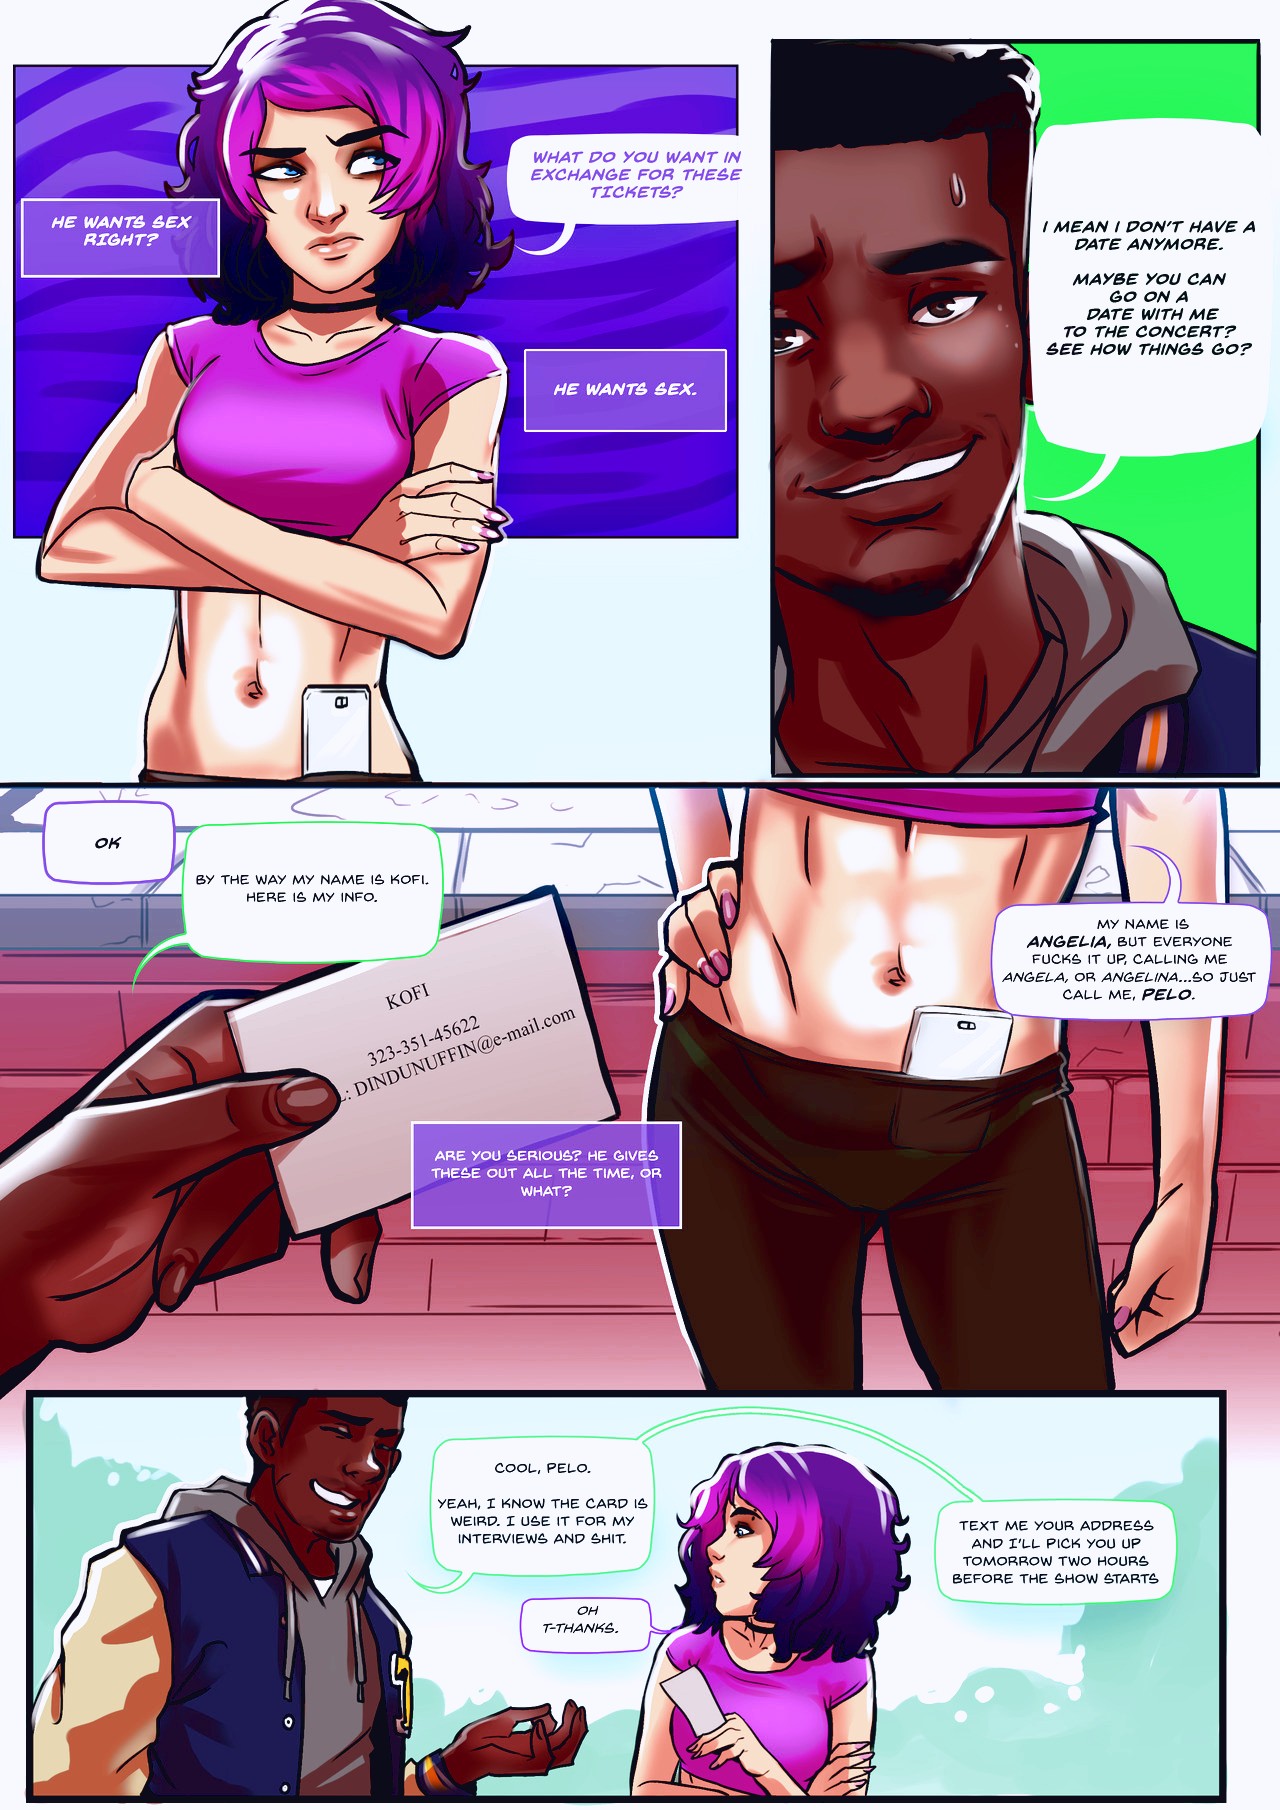 The Backdoor Pass page 03